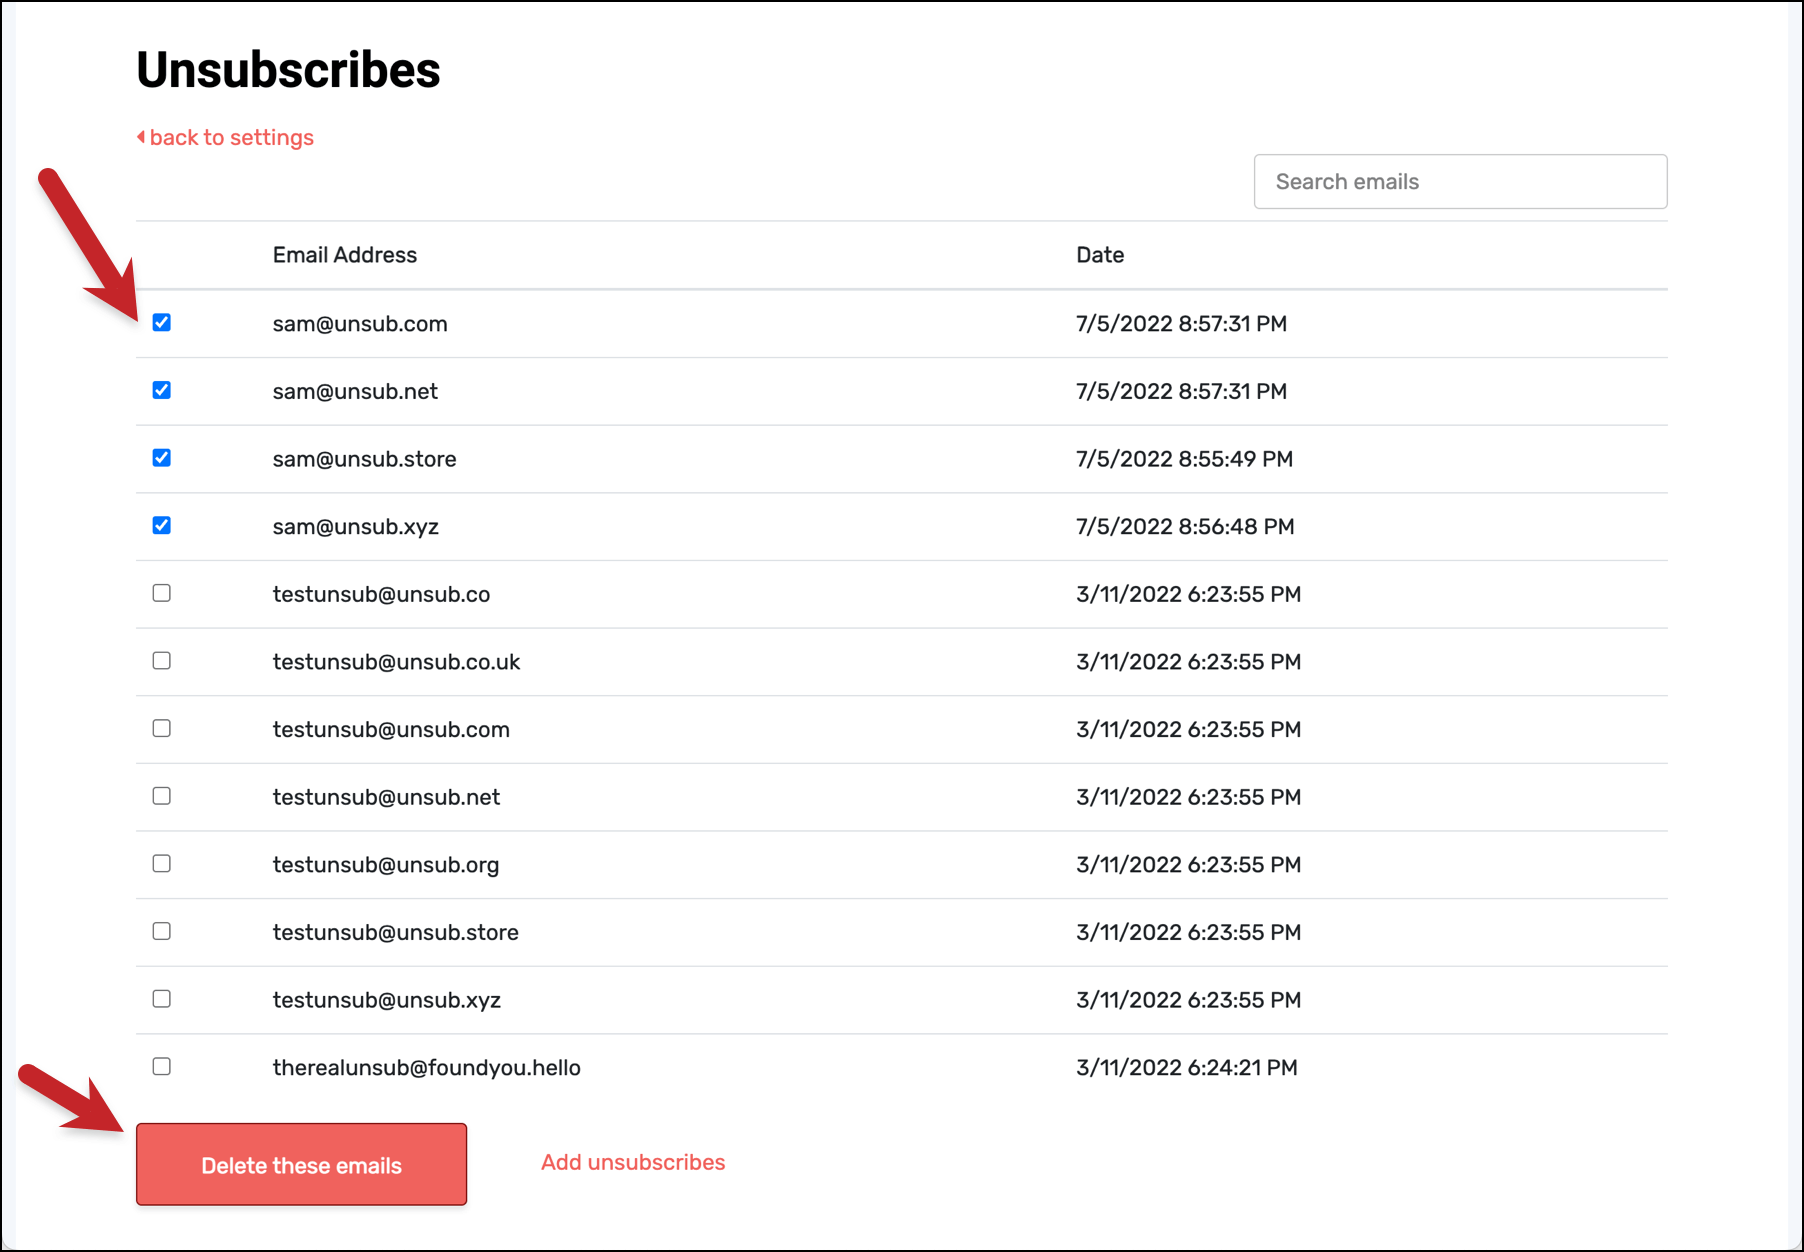 Remove unsubscribed addresses